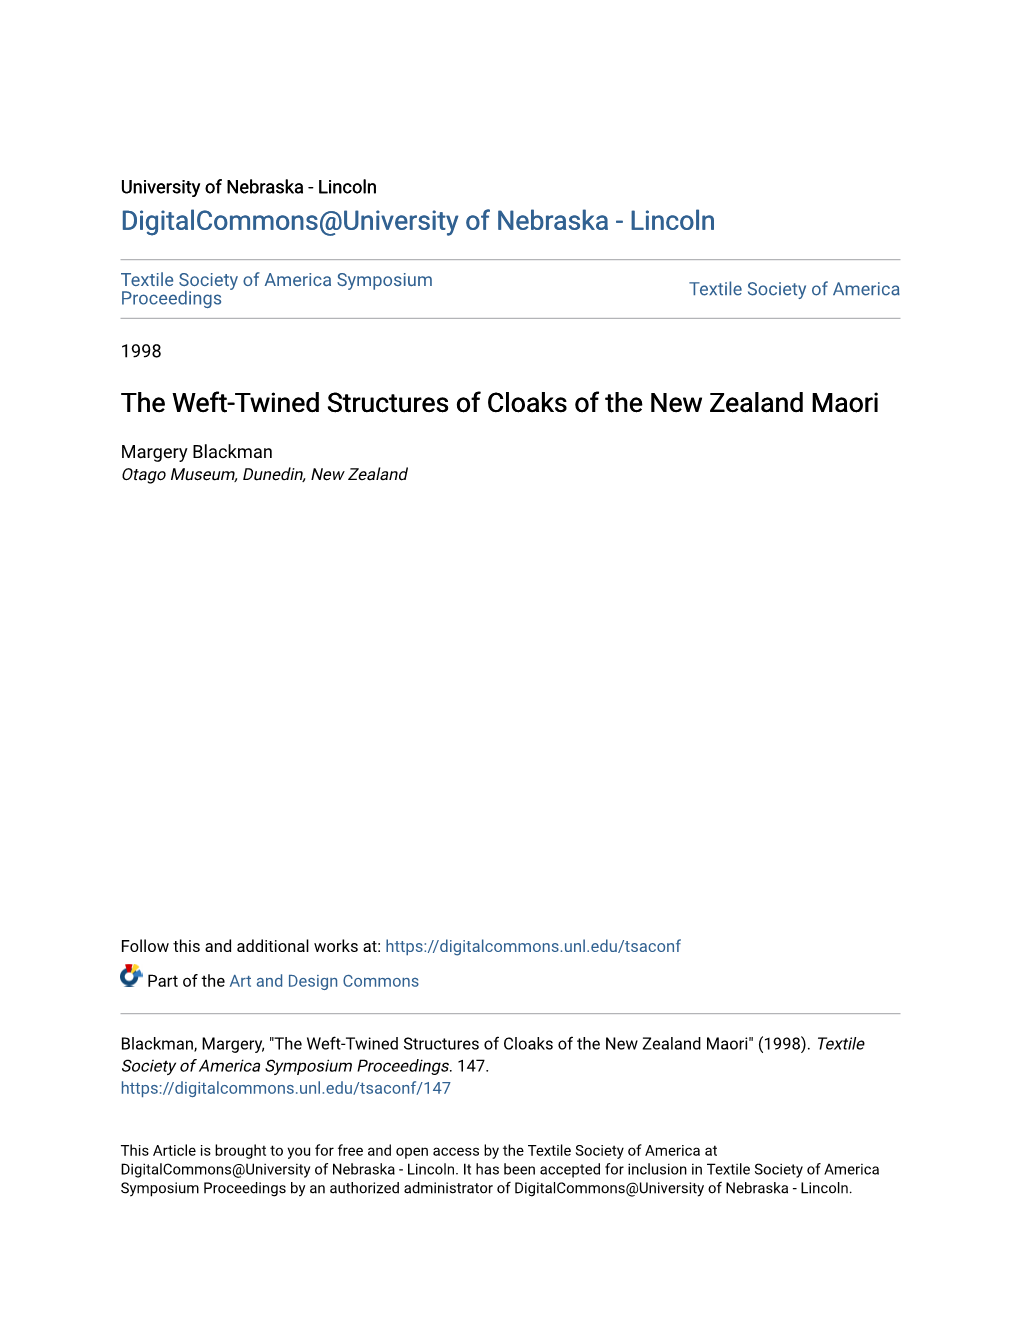 The Weft-Twined Structures of Cloaks of the New Zealand Maori